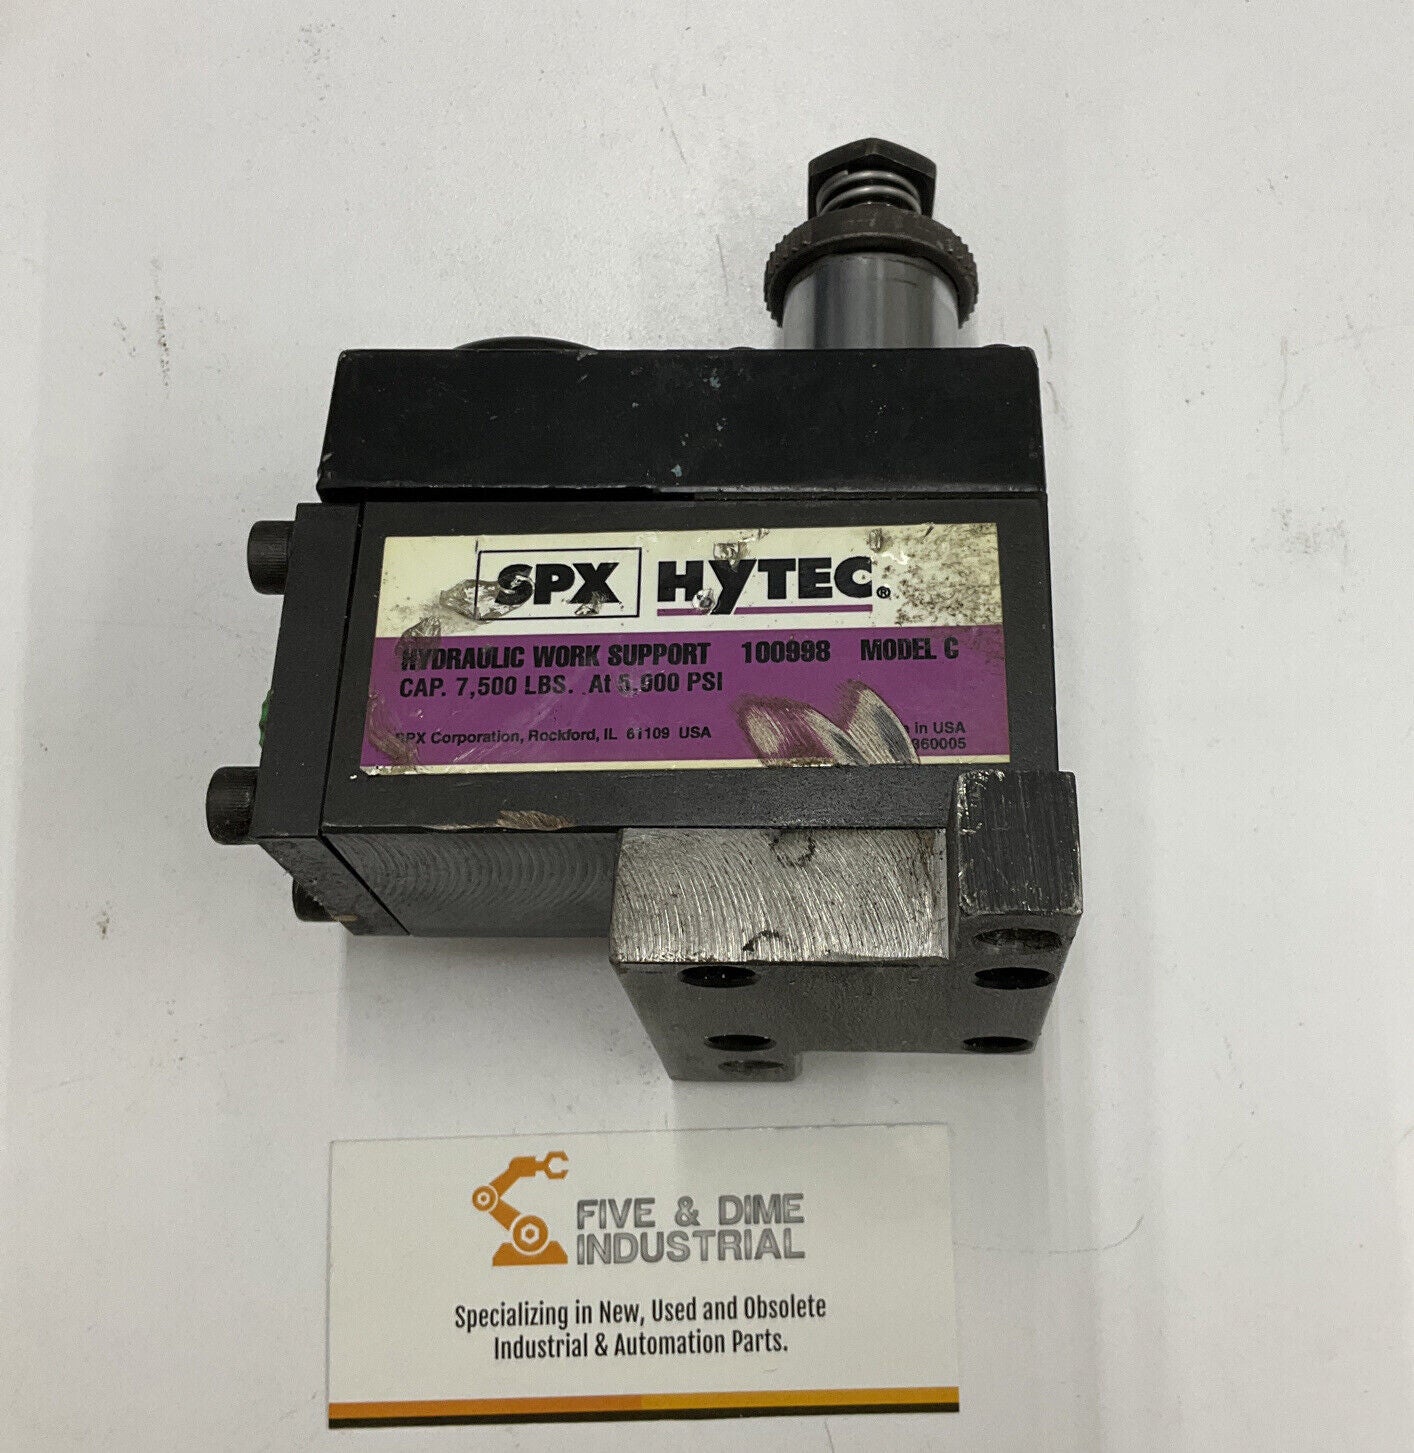 SPX Hytec 100998 Hydraulic Work Support Model C (RE103)